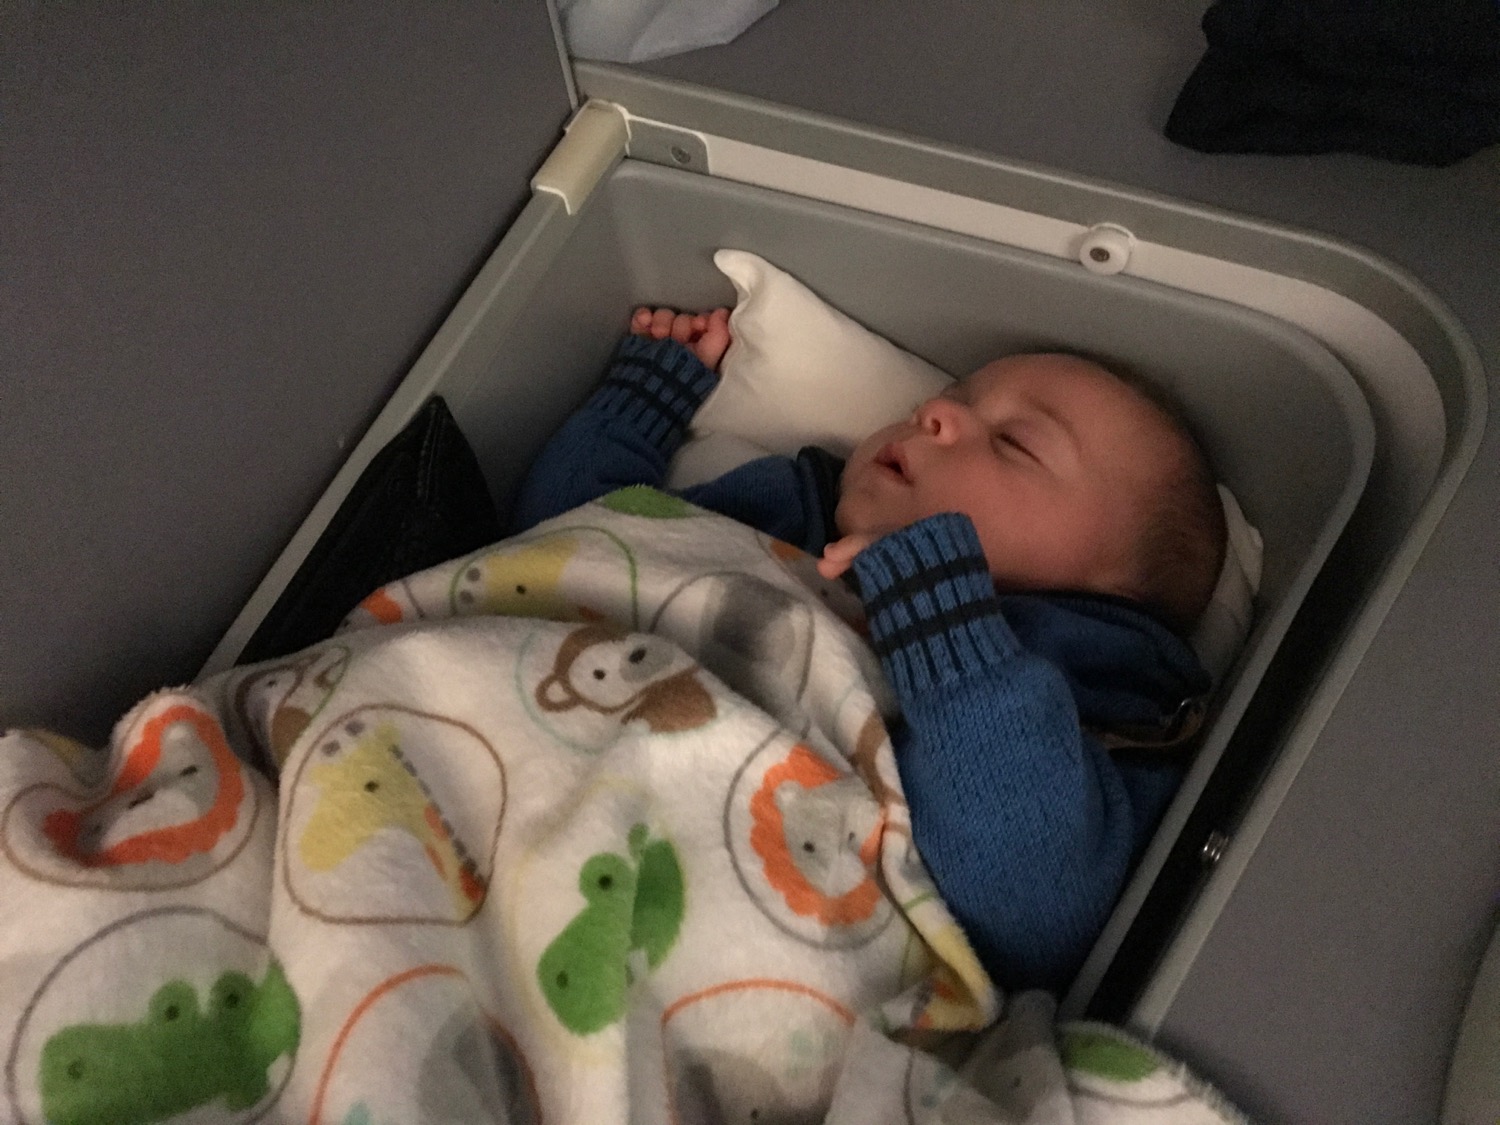 United Airlines Infant Policy